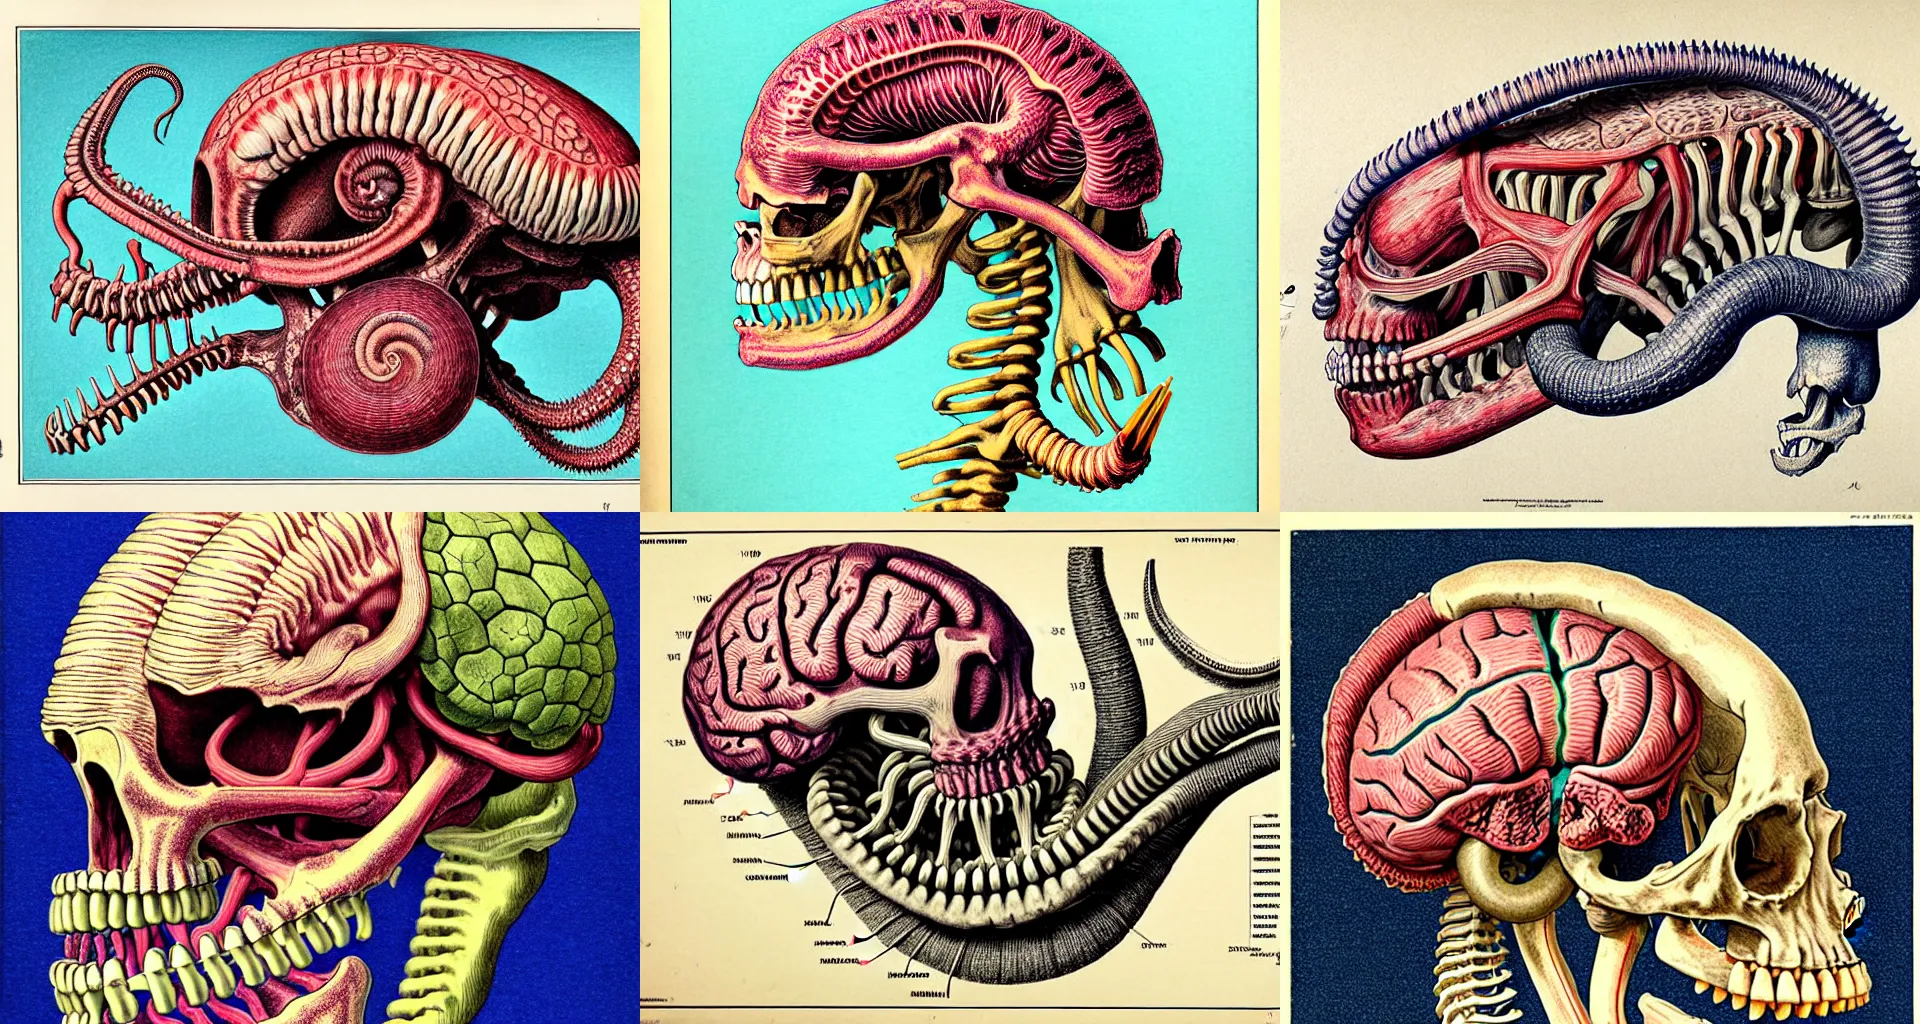 Prompt: hyper-detailed expert color pencil antique medical illustration of Kaiju head cross-section, nautilus brain, ribcage, xhenomorph, with tentacles coming out of open mouth and exposed jaw bone, spinal column, cerebral corpus callosum, vastus lateralis, cerebellar peduncle, interventricular foramen, symmetrical H 832